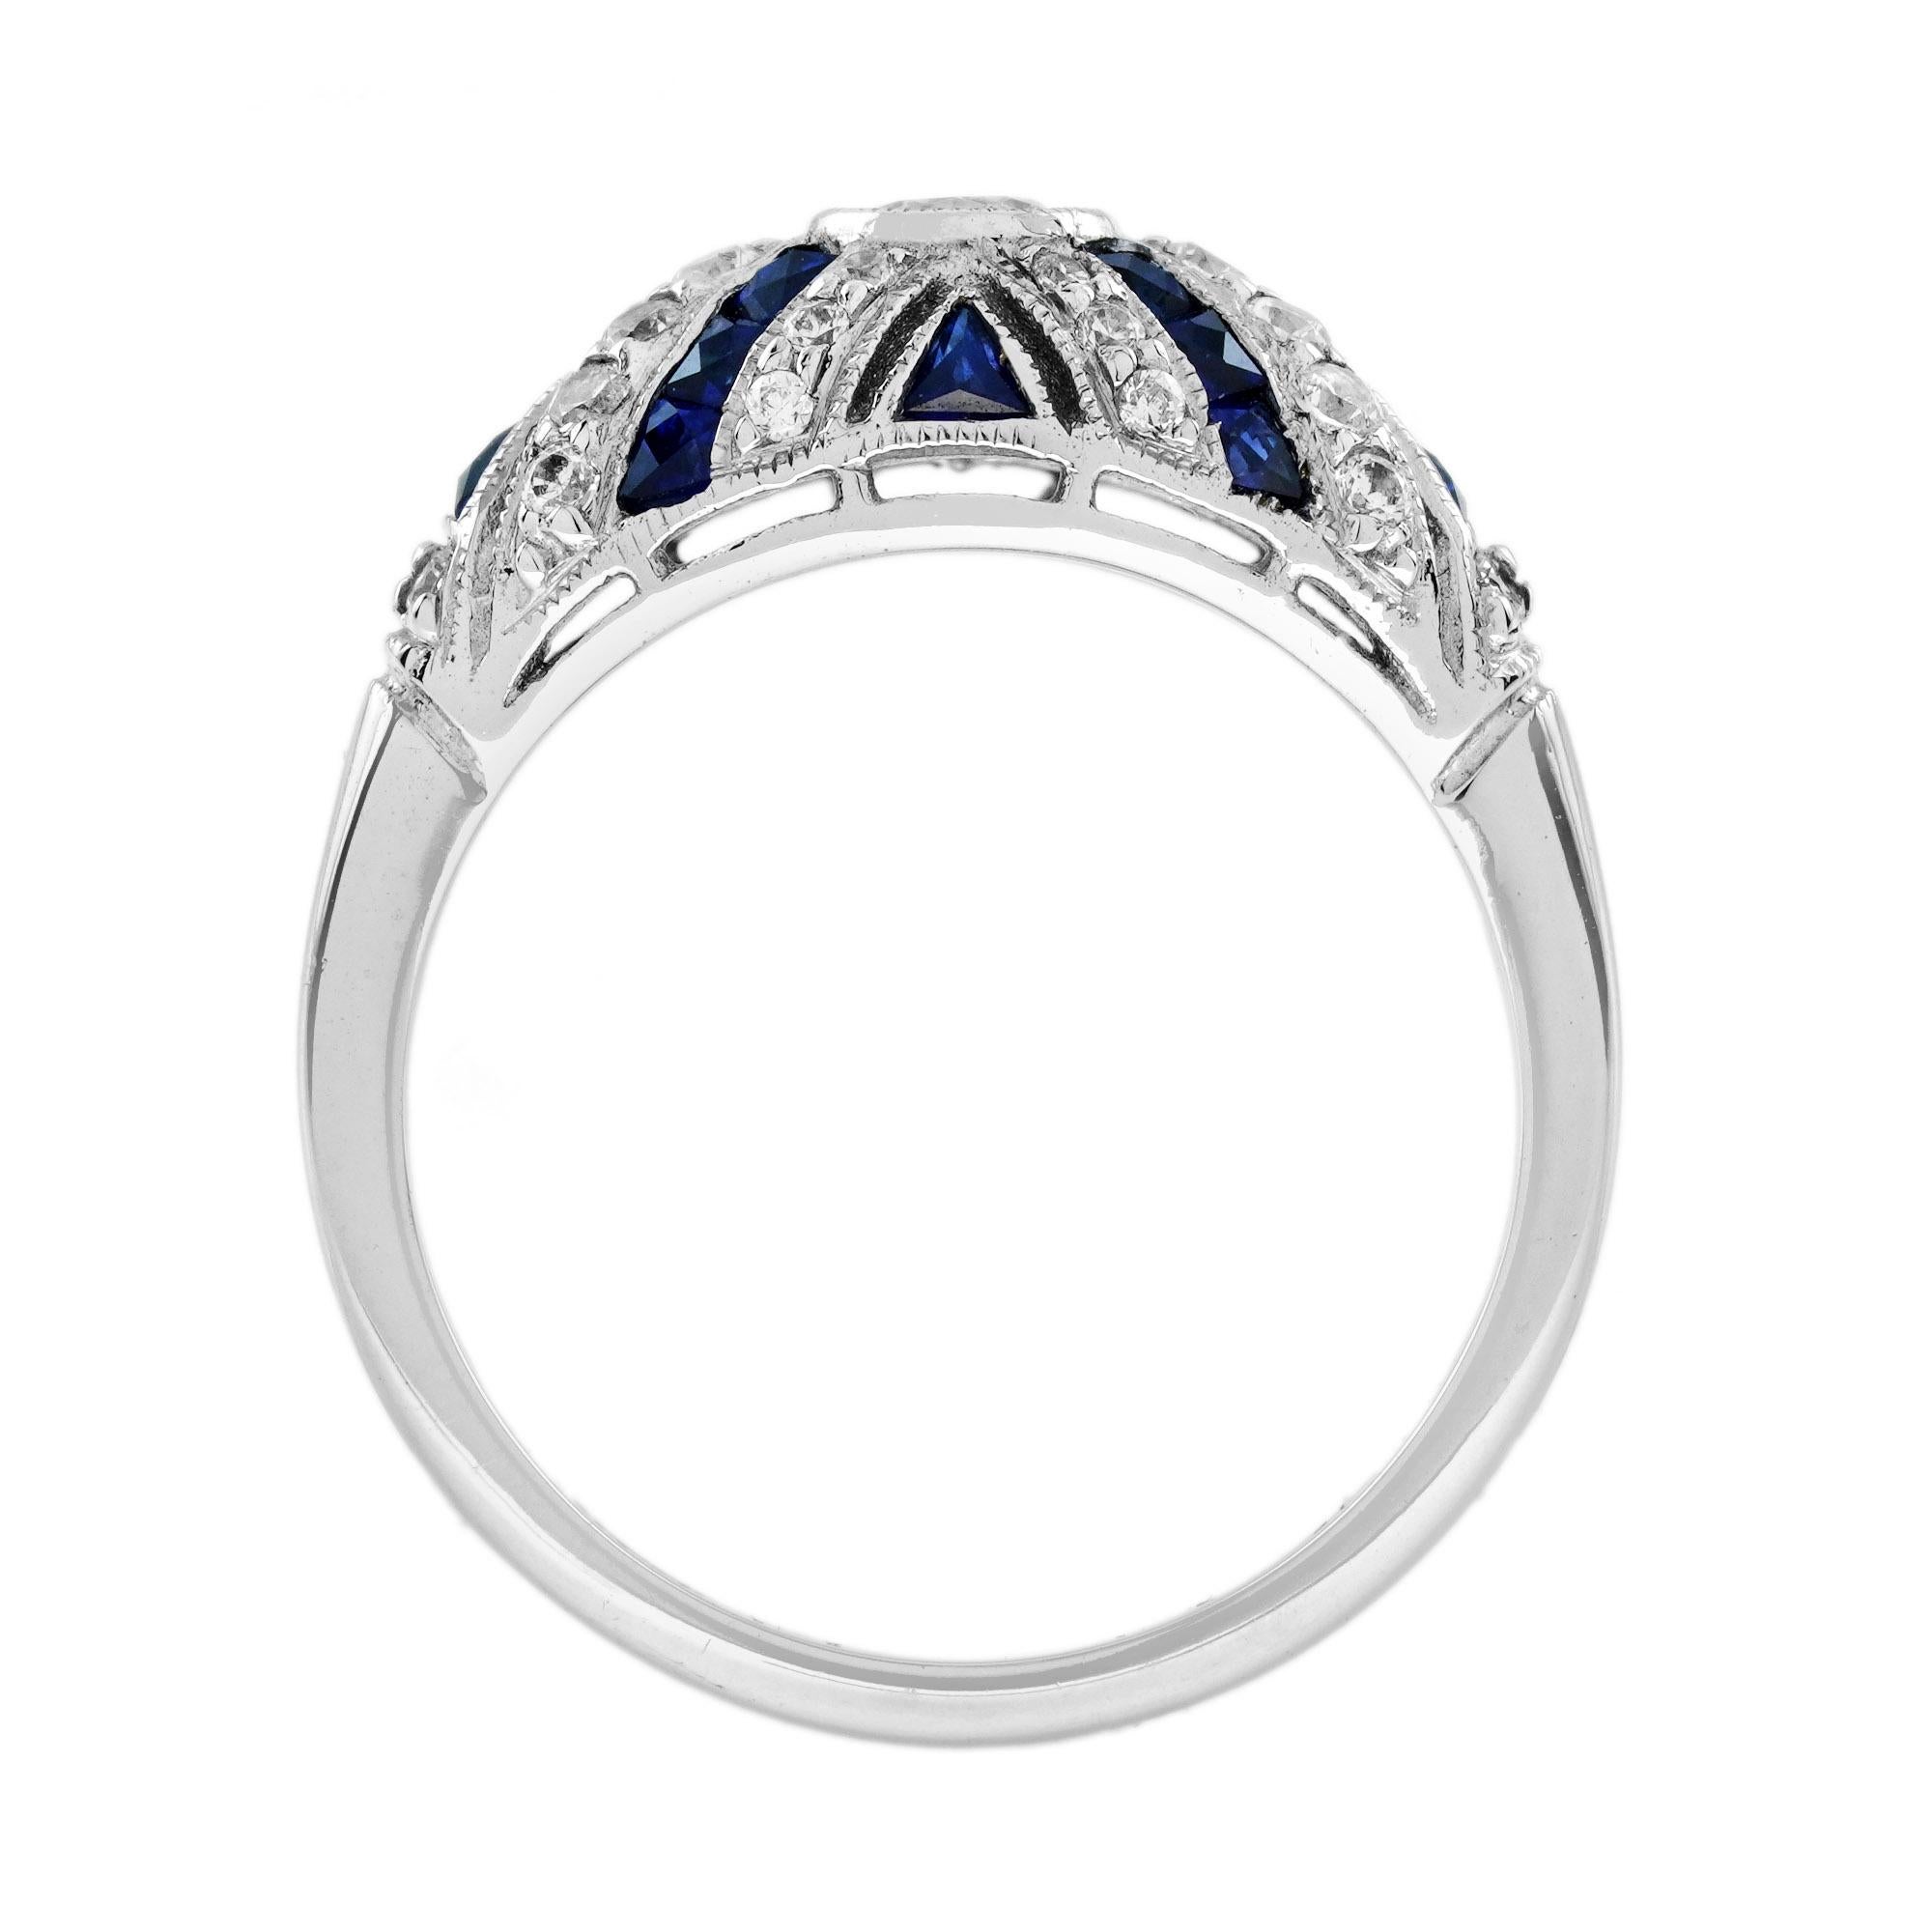 Diamond and Blue Sapphire Art Deco Style Engagement Ring in 18K White Gold For Sale 1